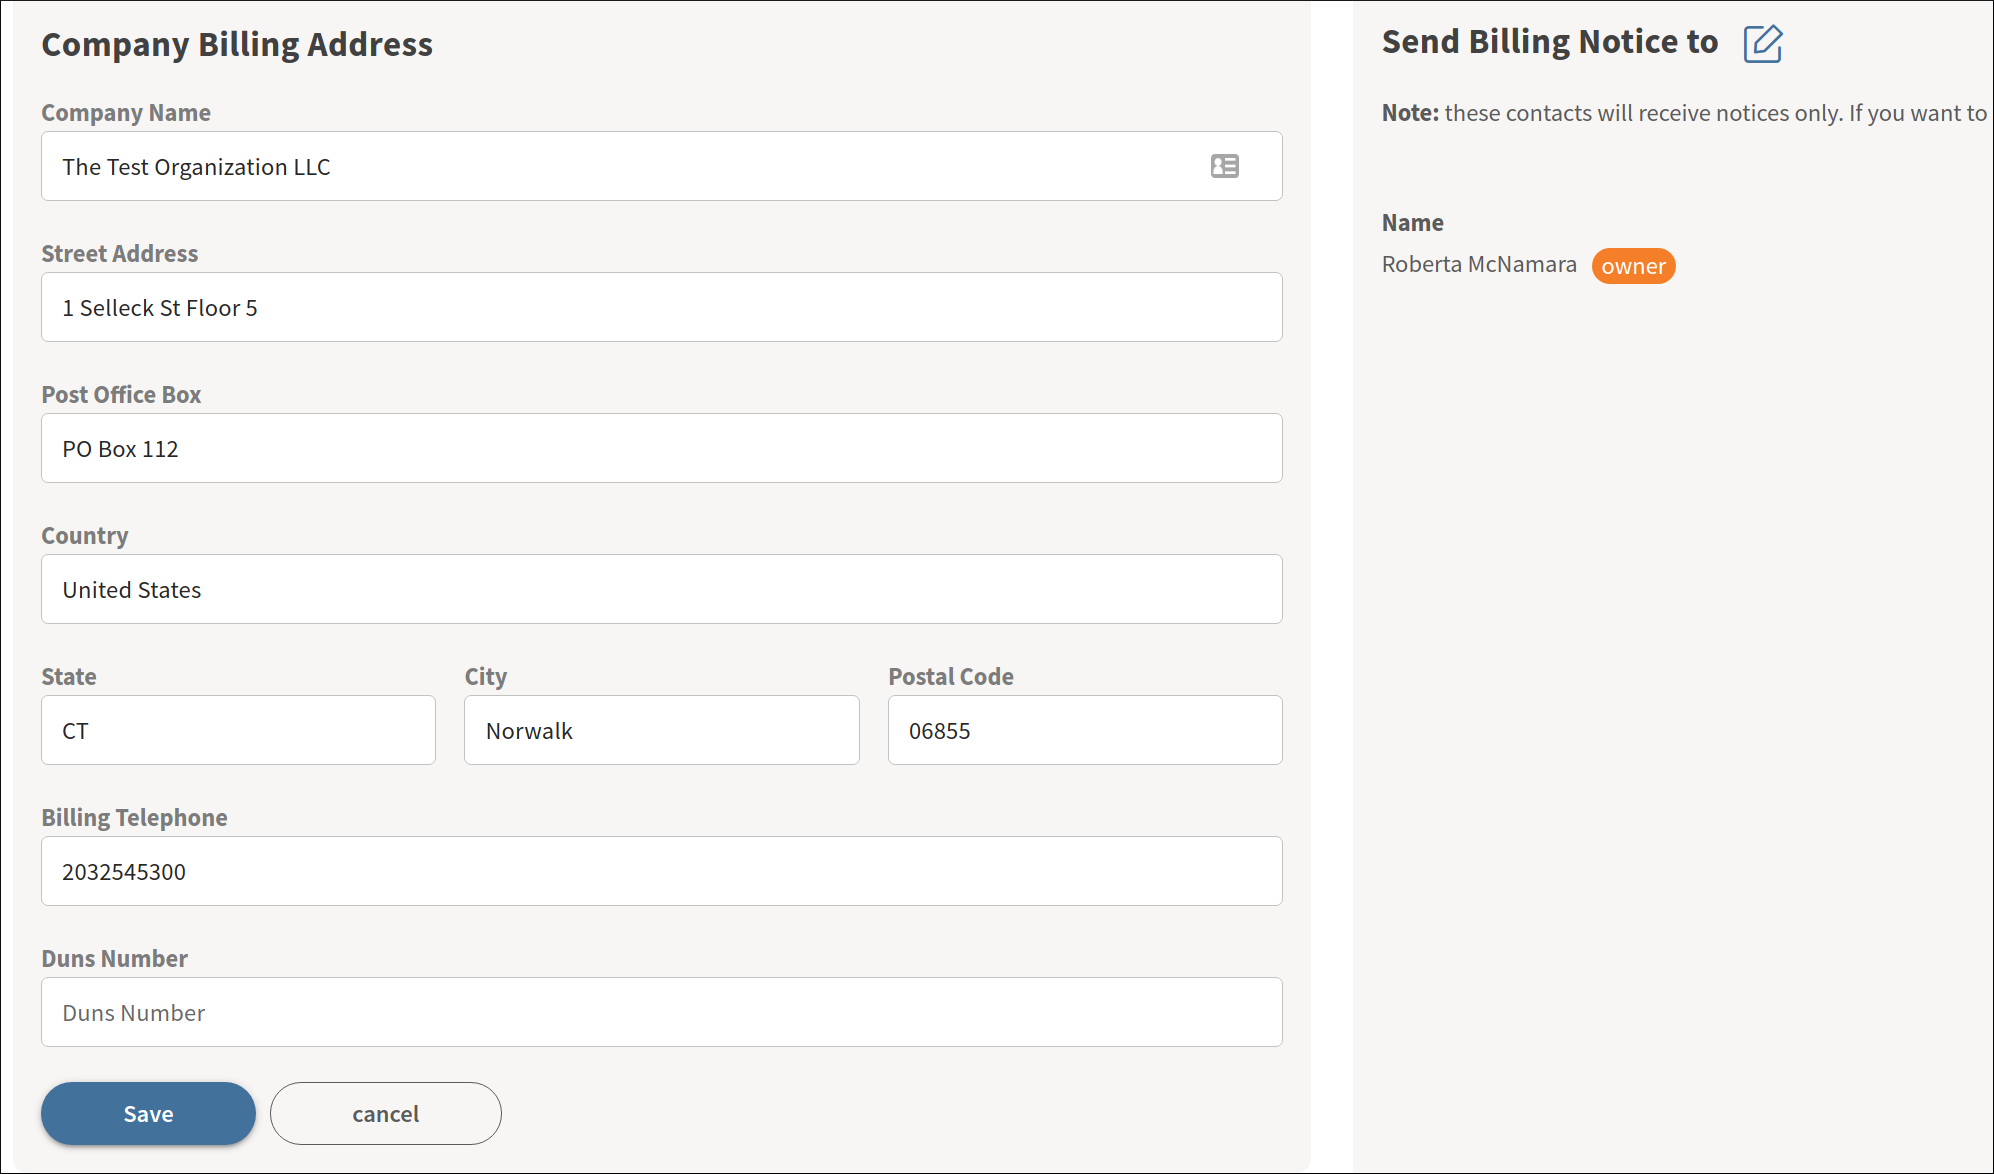 Image of top section of the billing setup form showing fields for company information